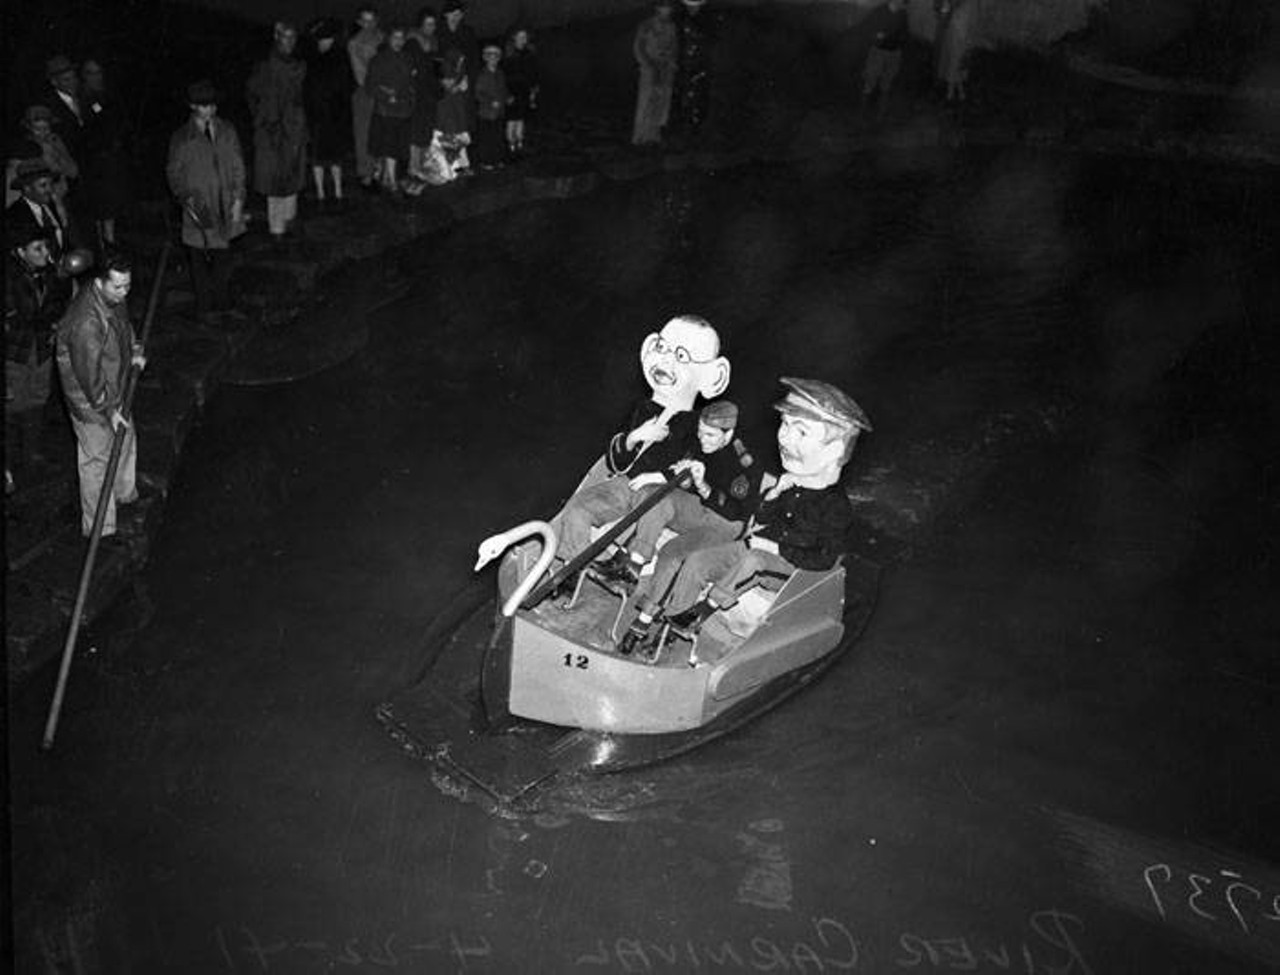 Paddleboat in the 1941 Texas Cavaliers River Parade
The caption at the time called them “strange creatures,” but nowadays we call them Oklahomans.